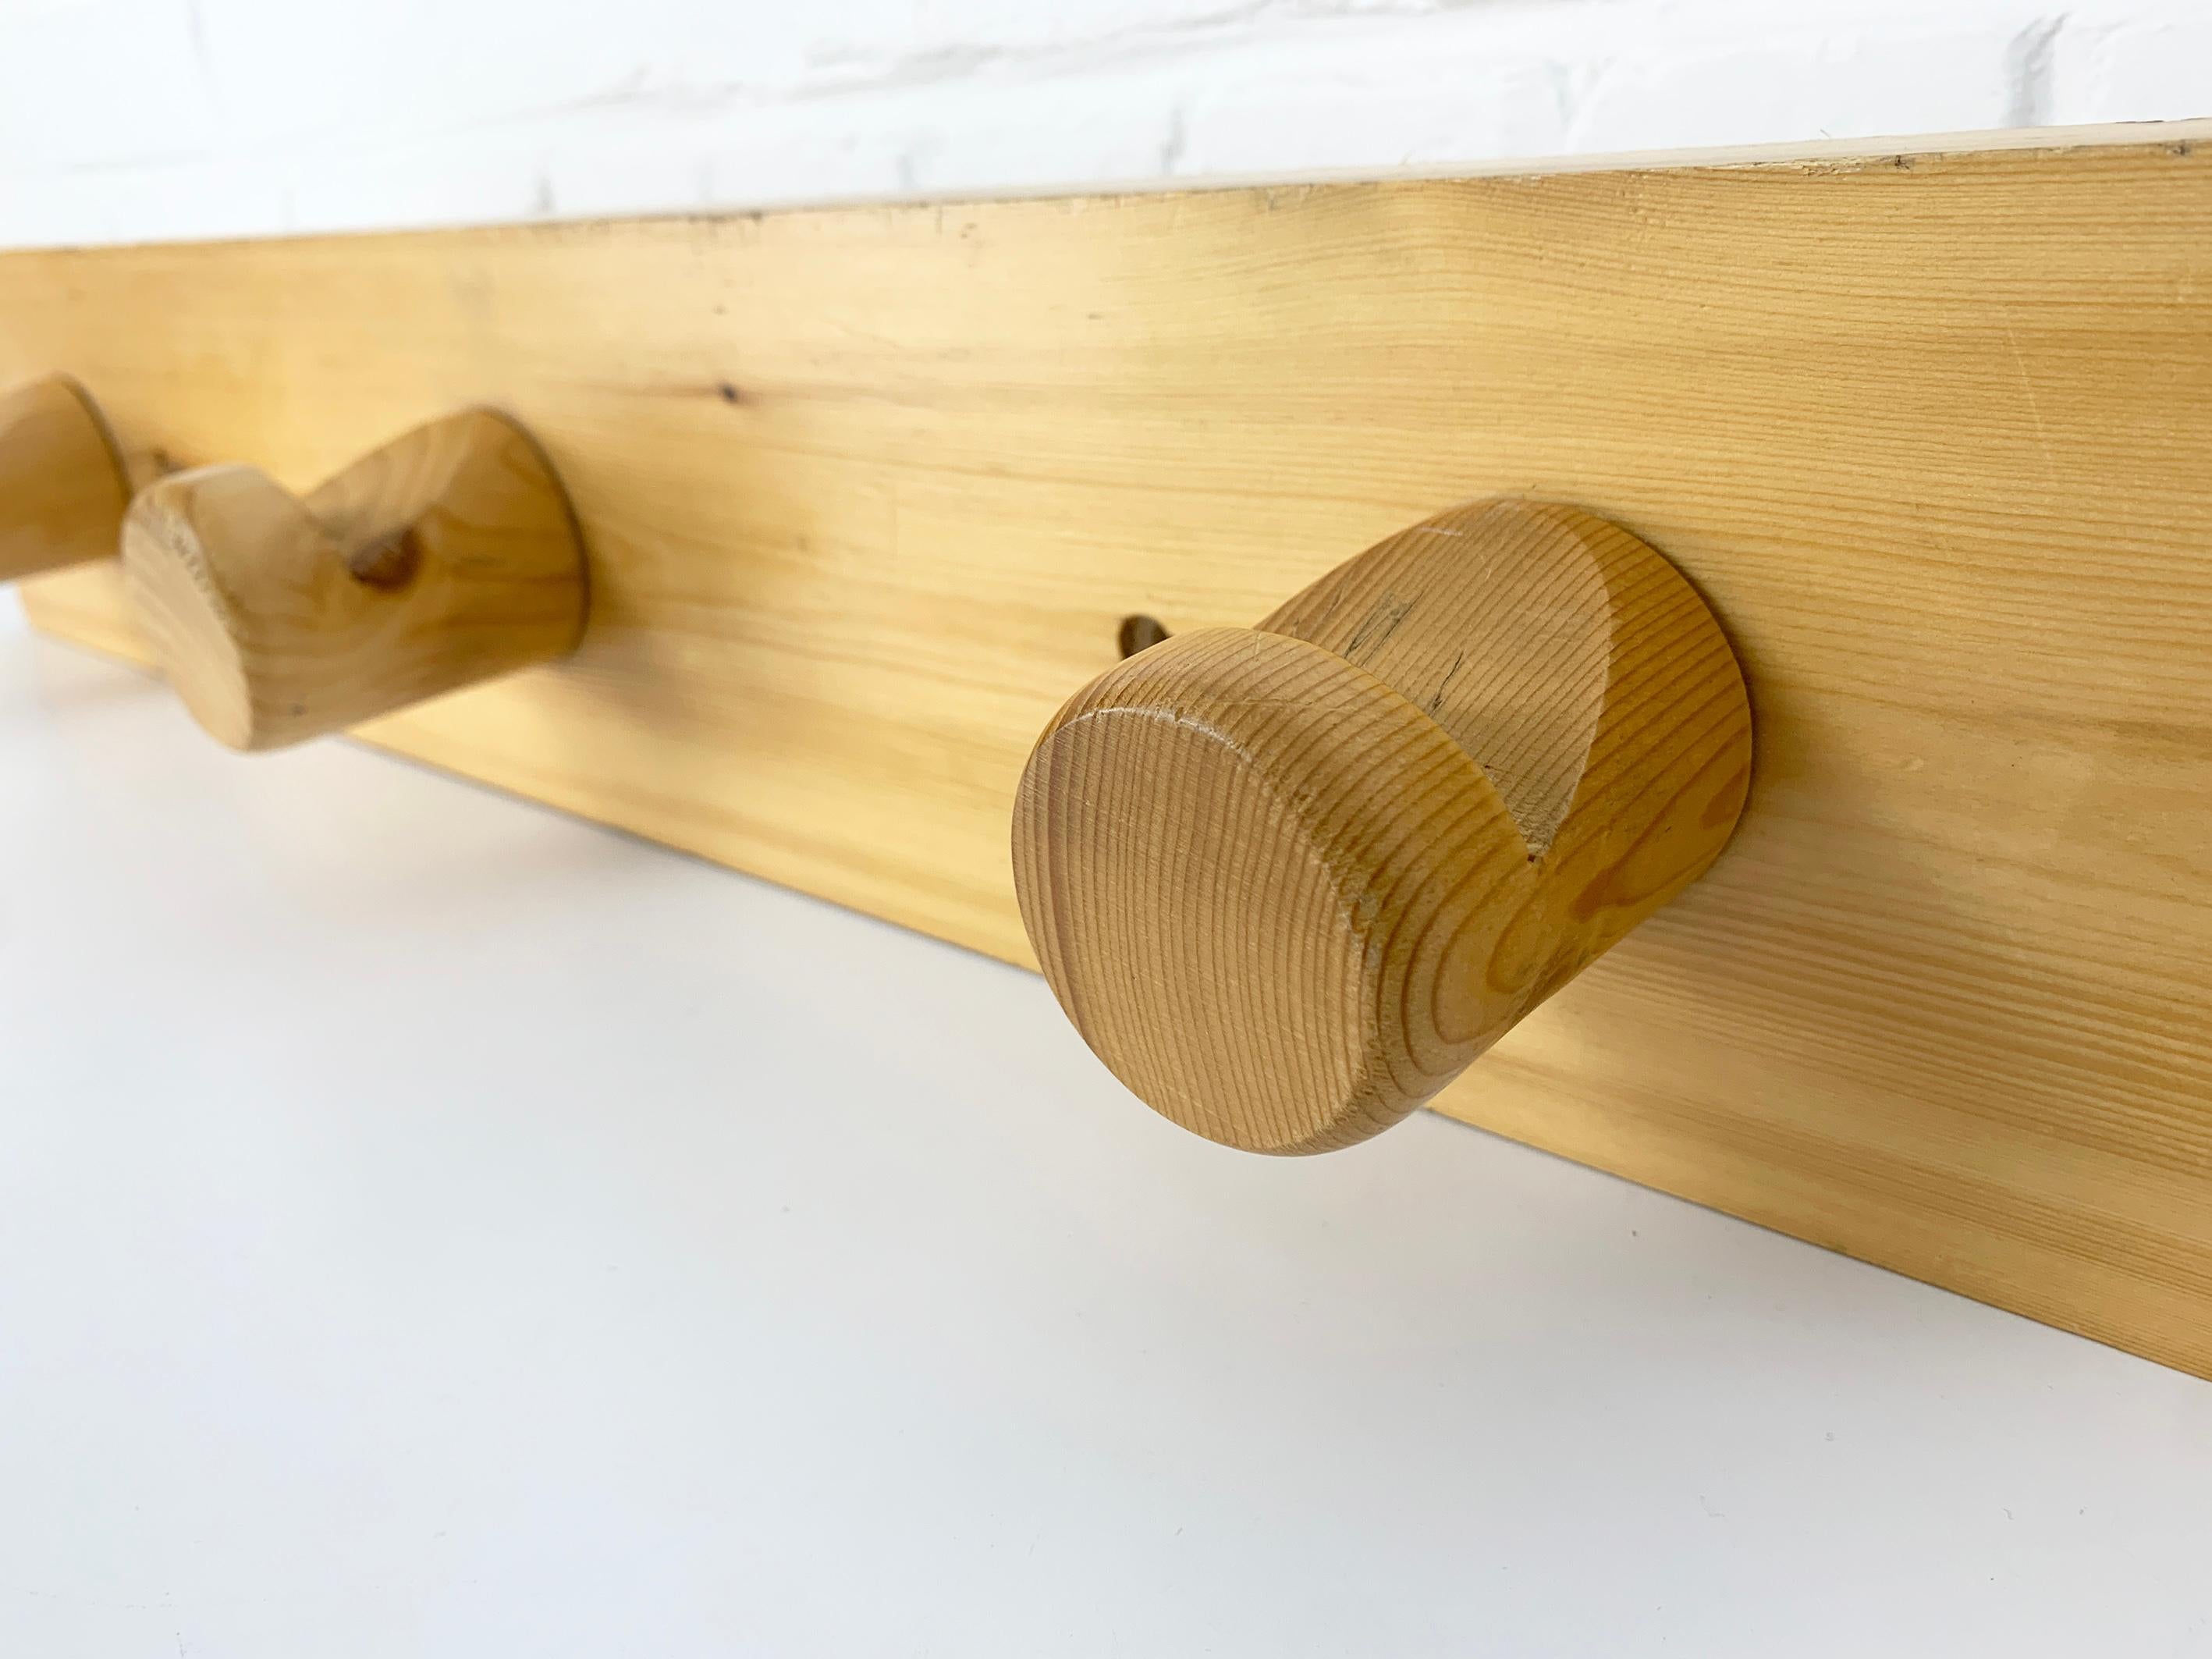 French Coat Rack by Charlotte Perriand for Les Arcs, Pinewood, 1960s - 3 avail. For Sale 2